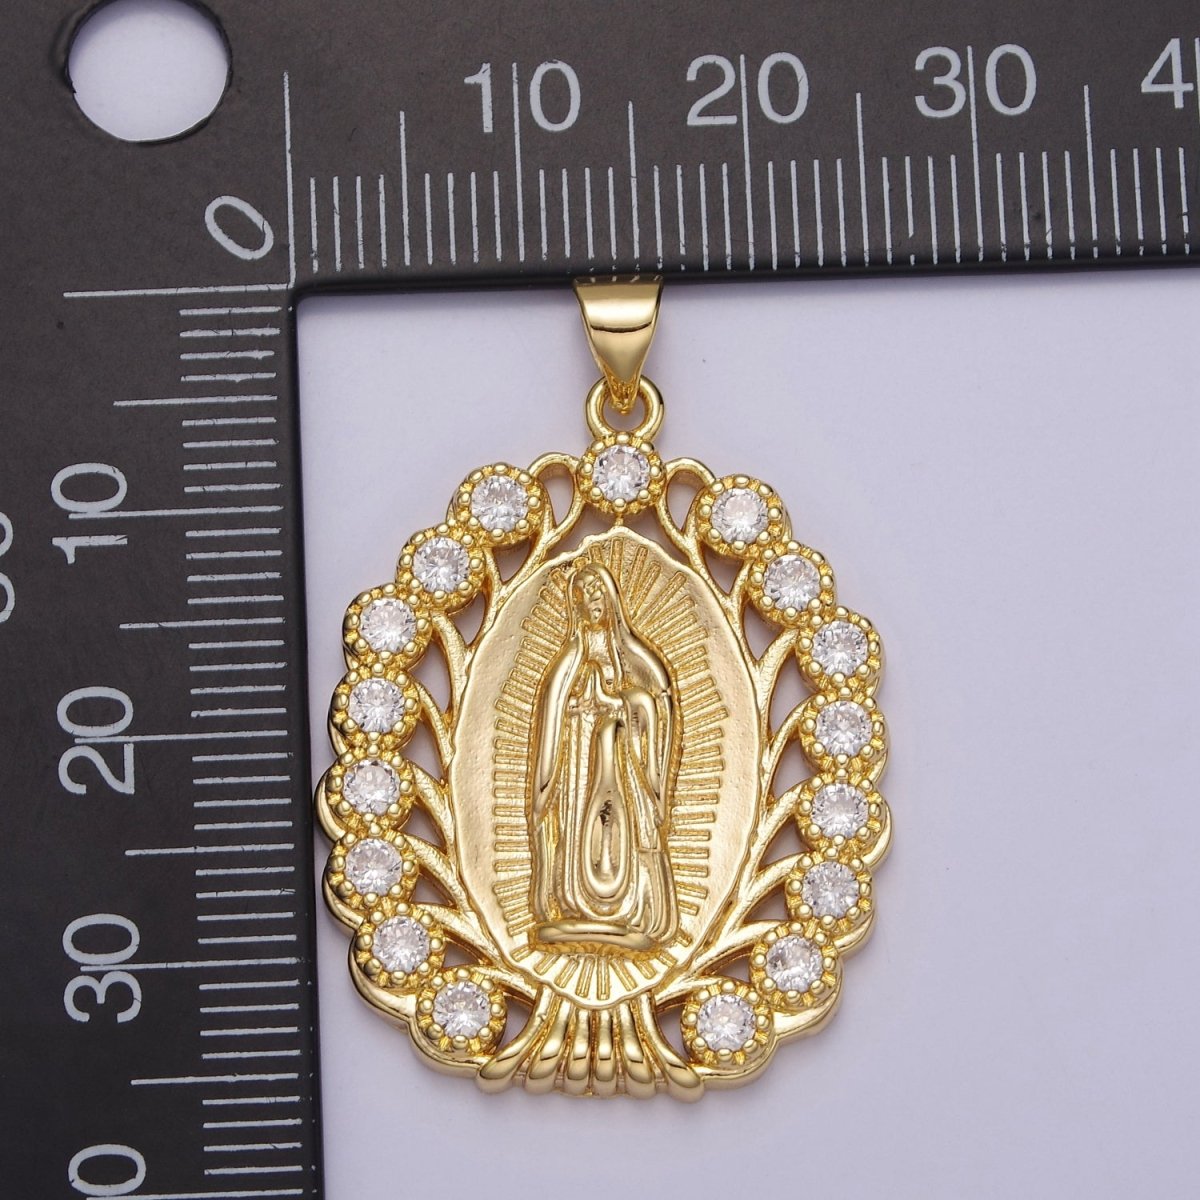 Gold Filled Virgin Mary Pendant Gold Lady Guadalupe Medallion Charm for Religious Necklace J-404 - DLUXCA